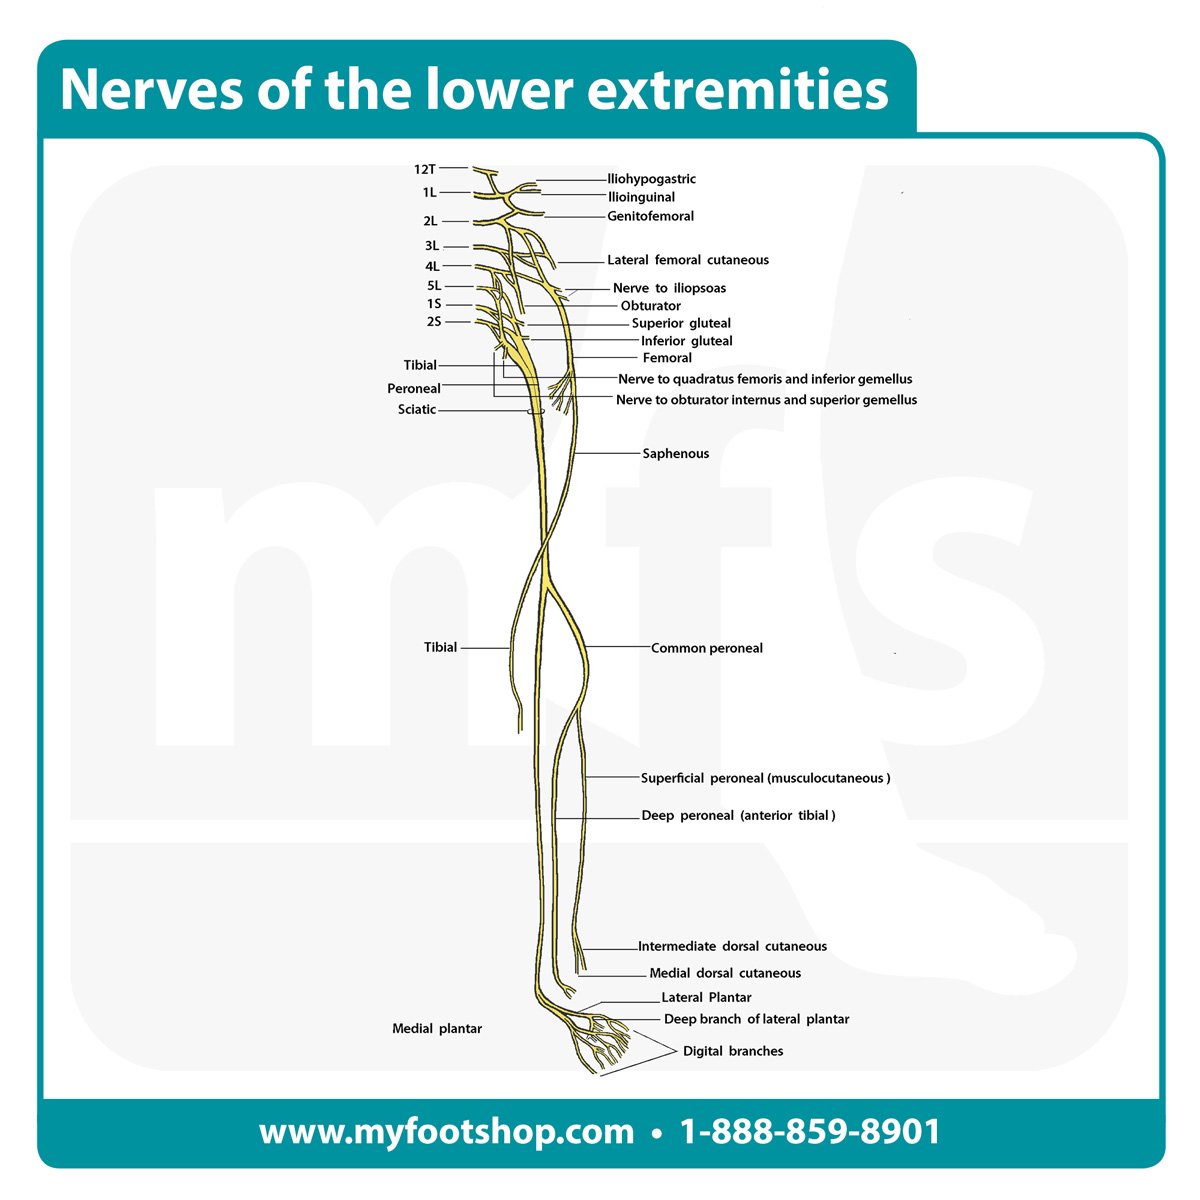 Nerves of the lower extremity